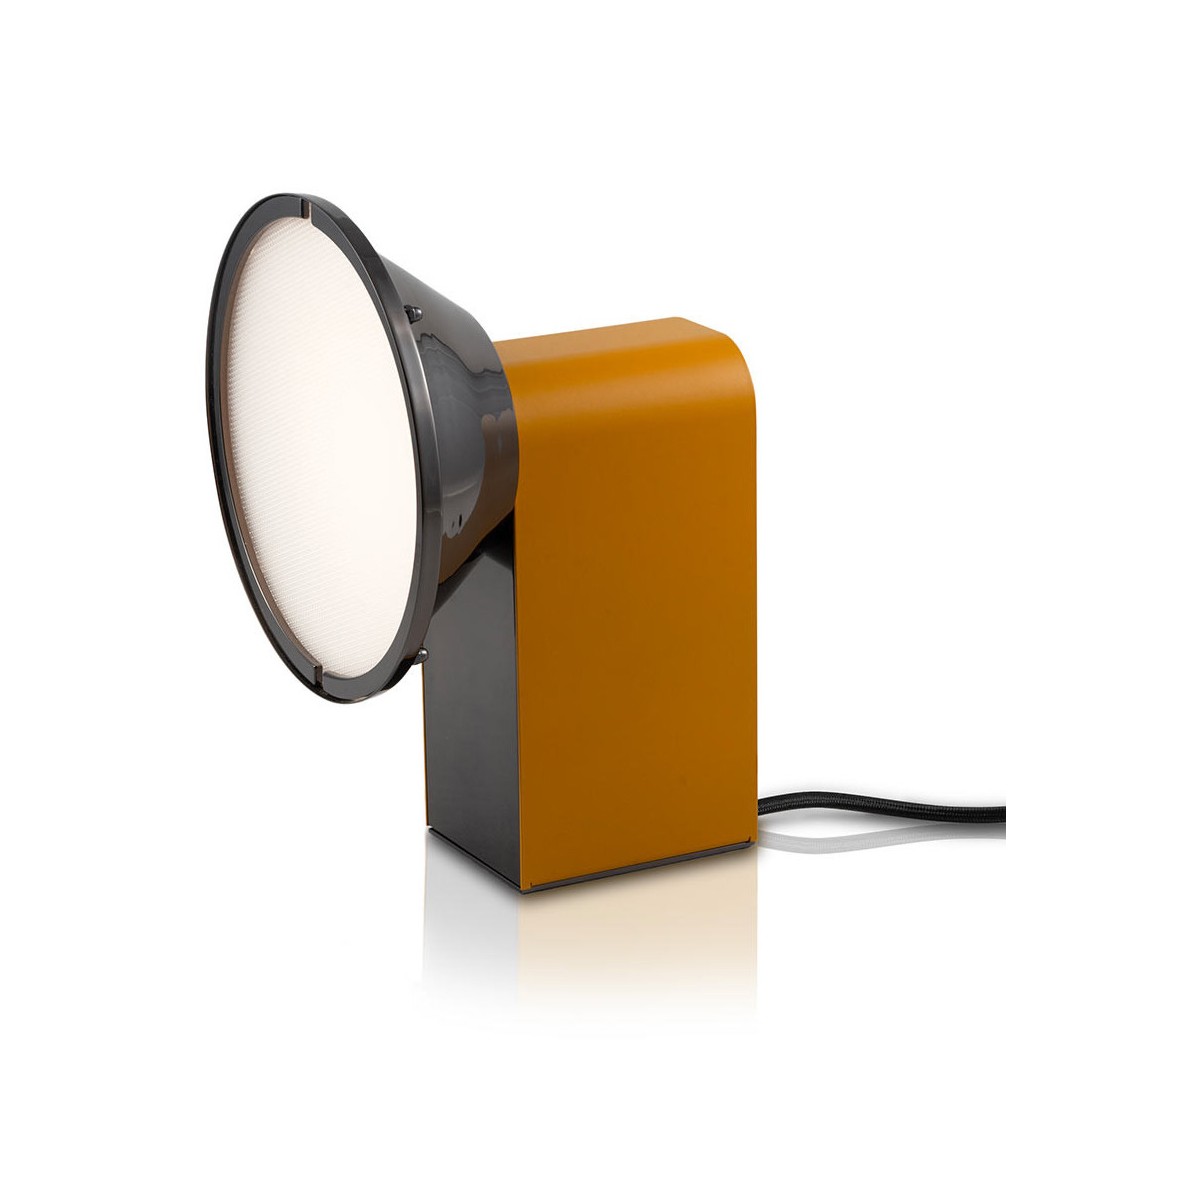 Wonder Mango - can be dimmed